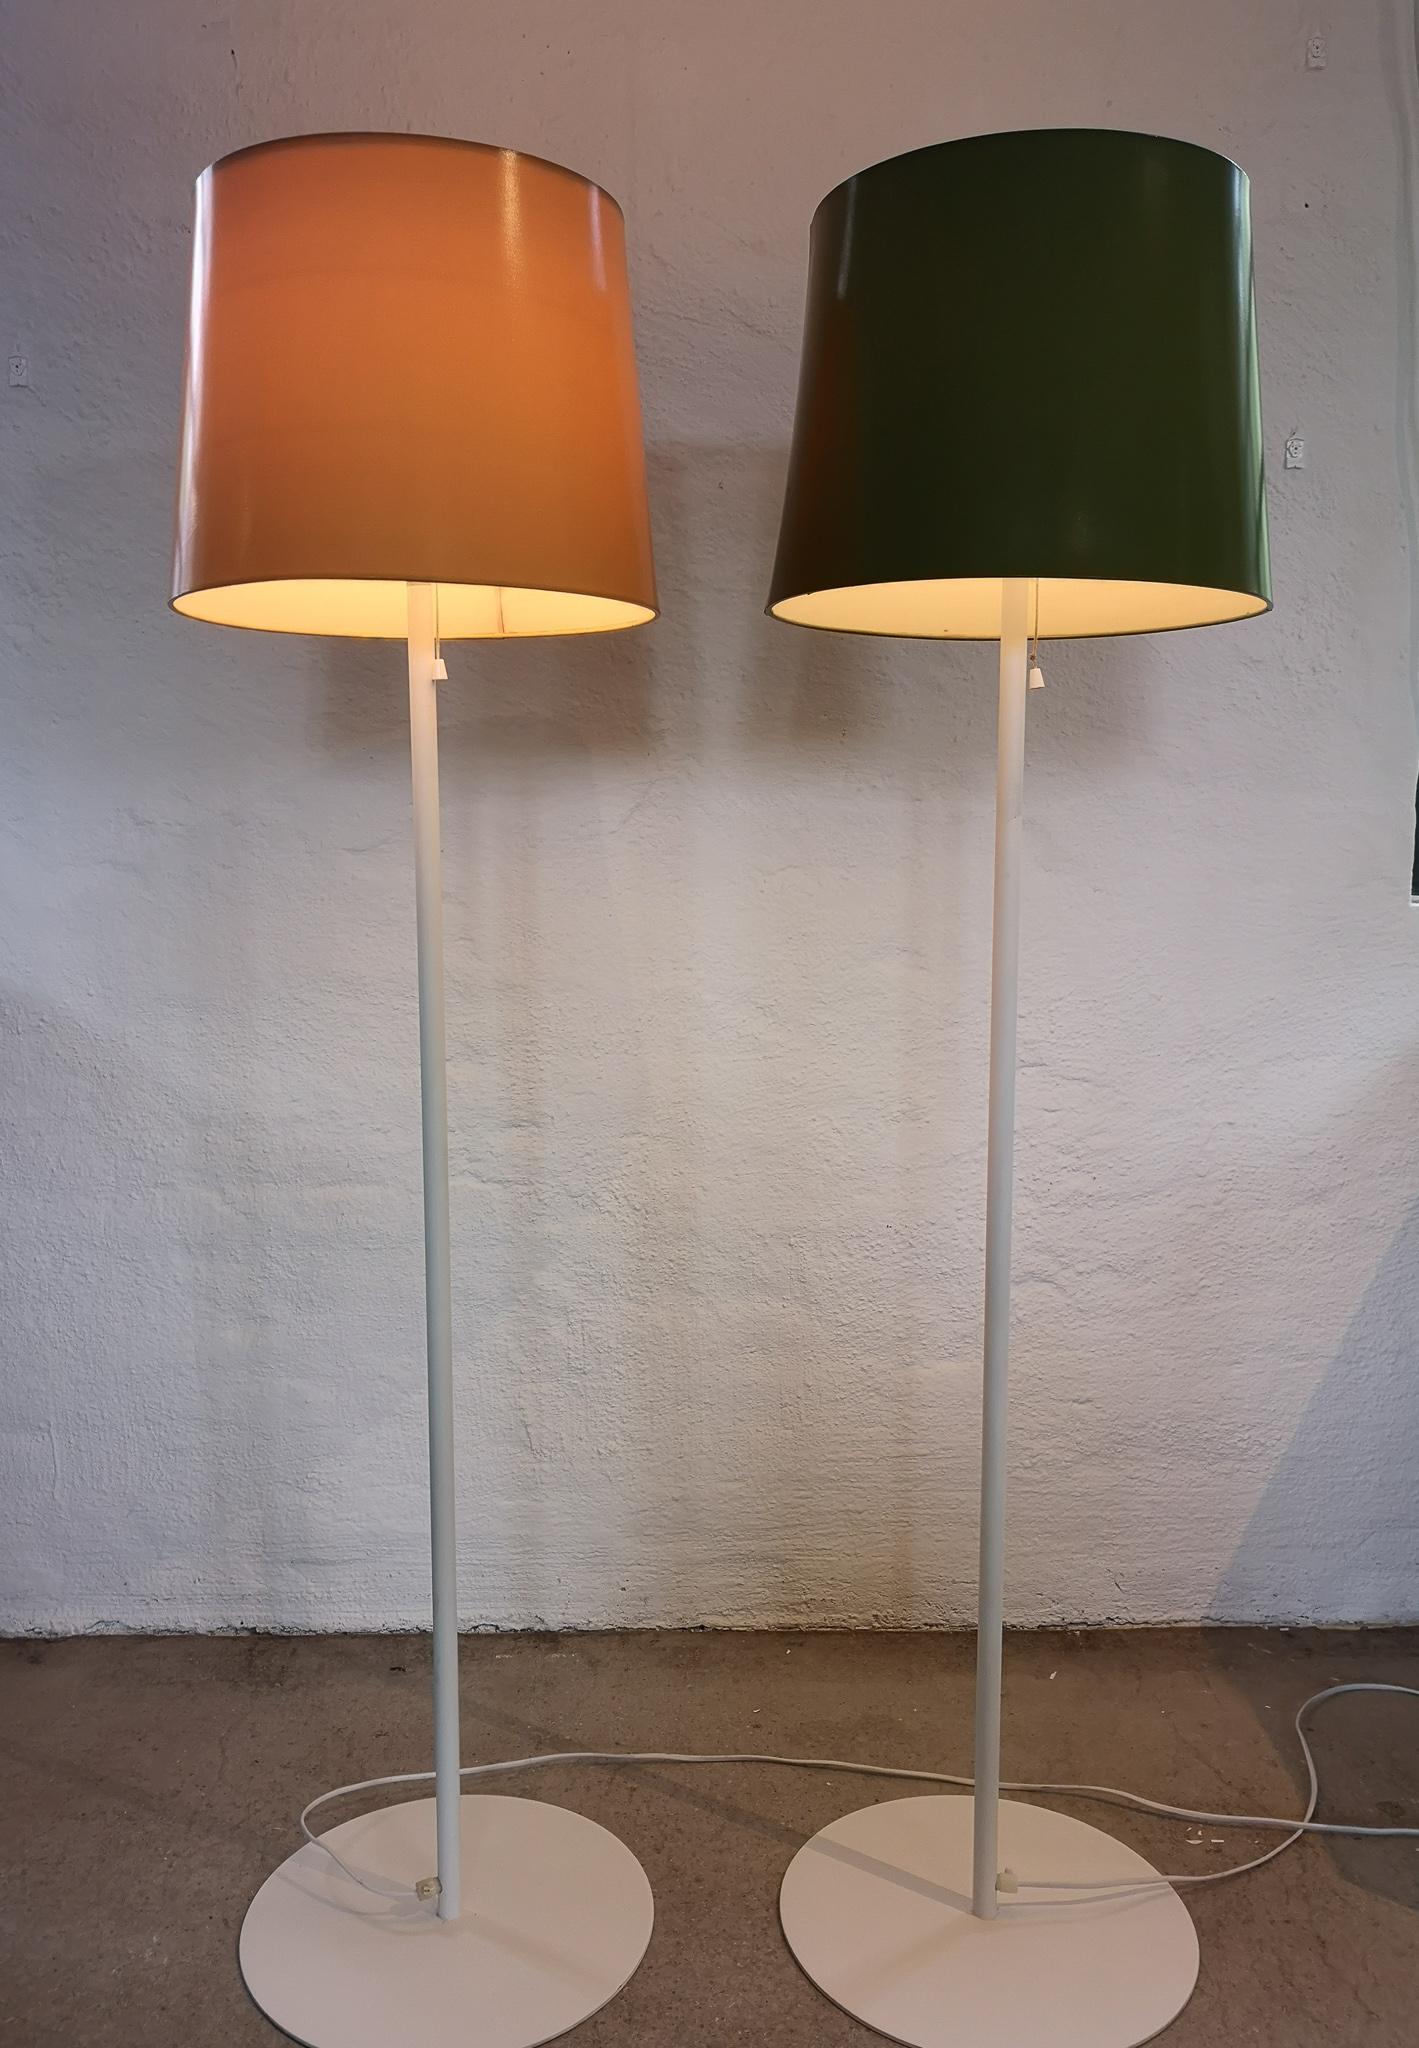 Two floor lamps manufactured in Sweden and Luxus. They are made in white with an iron cast base. The uplight shades are in acrylic. The shades are the original ones.

Nice vintage condition. 

Measures: Height 138 cm, base 36 diameter, shade 32